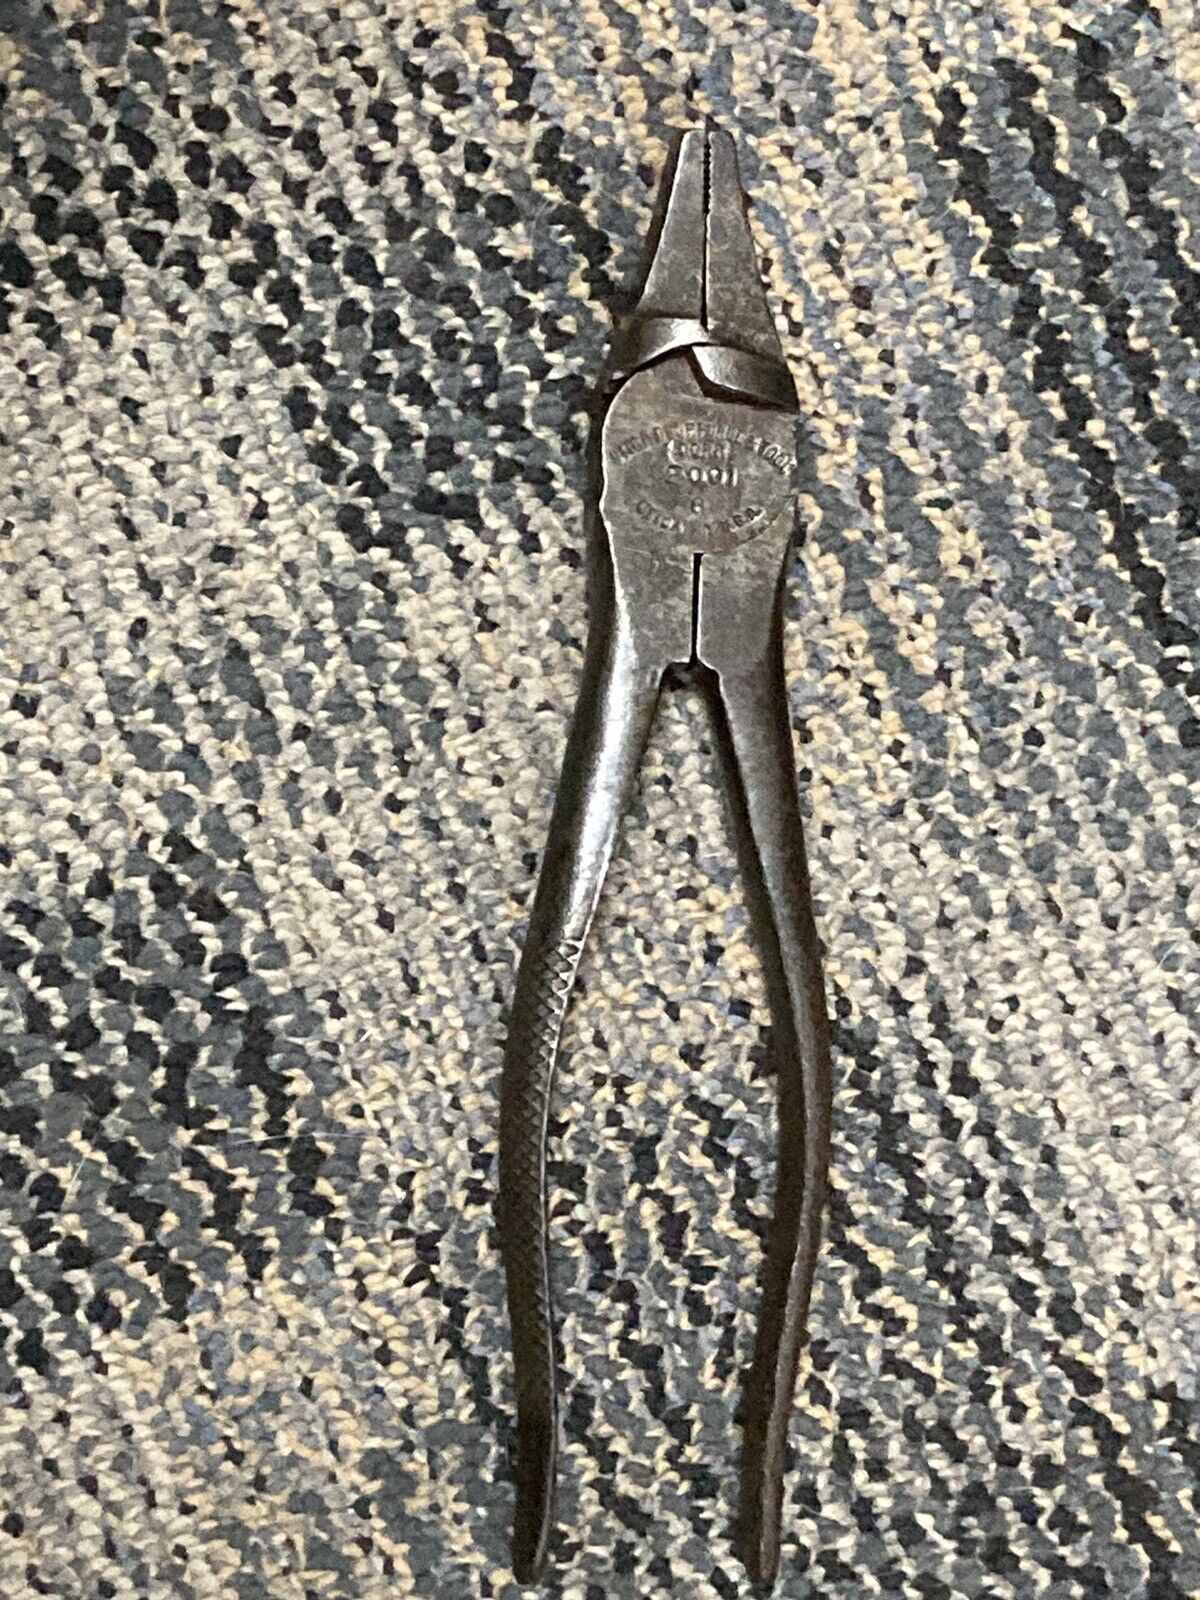 Vintage Utica 2001-8 Side Cutting Button Pliers Fence Wire Cutter Lineman's USA